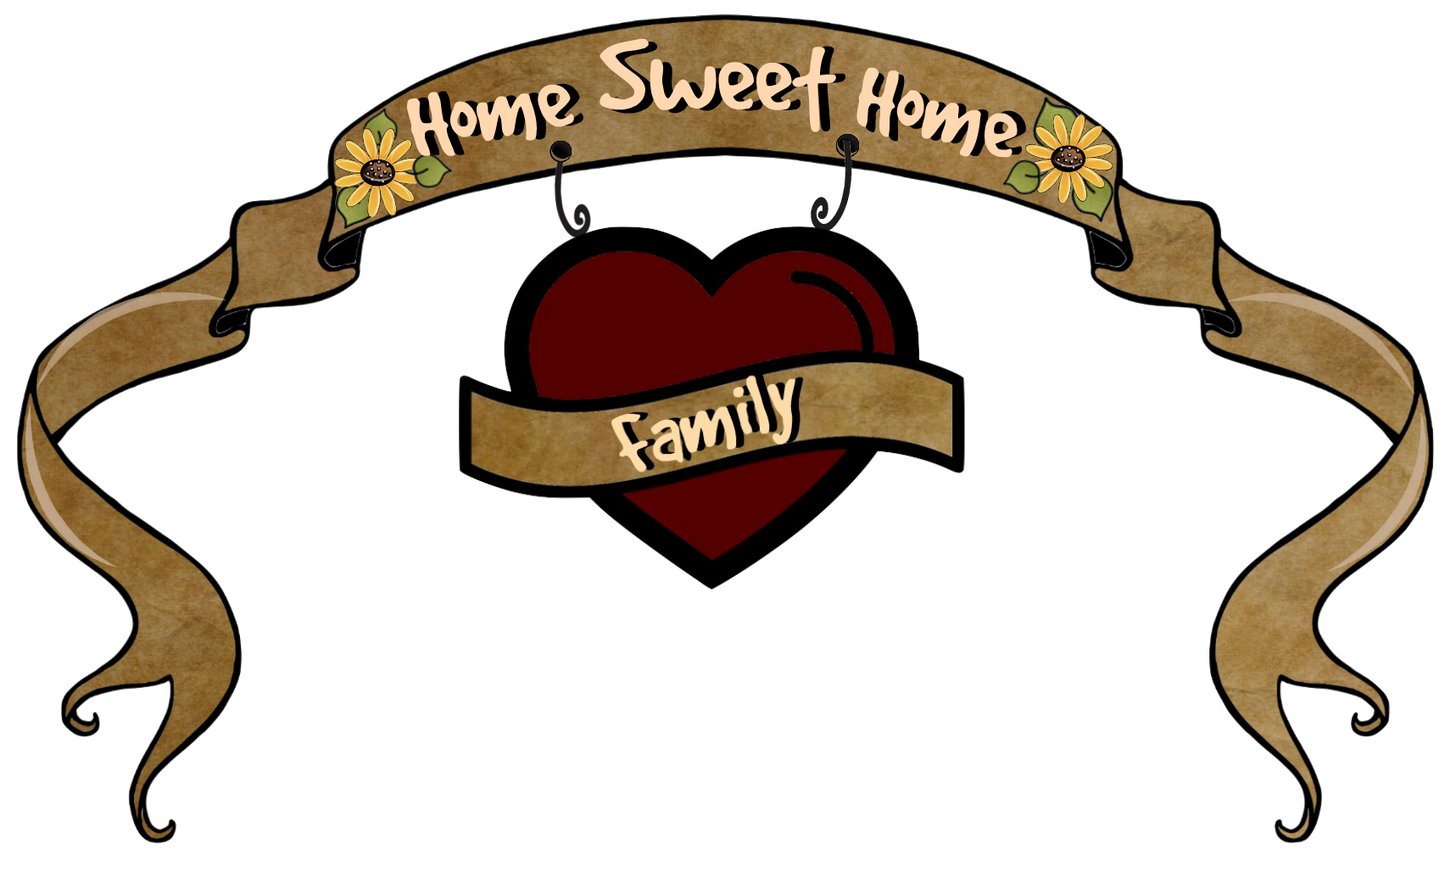 Home Sweet Home Heart Banner - Primitive Style